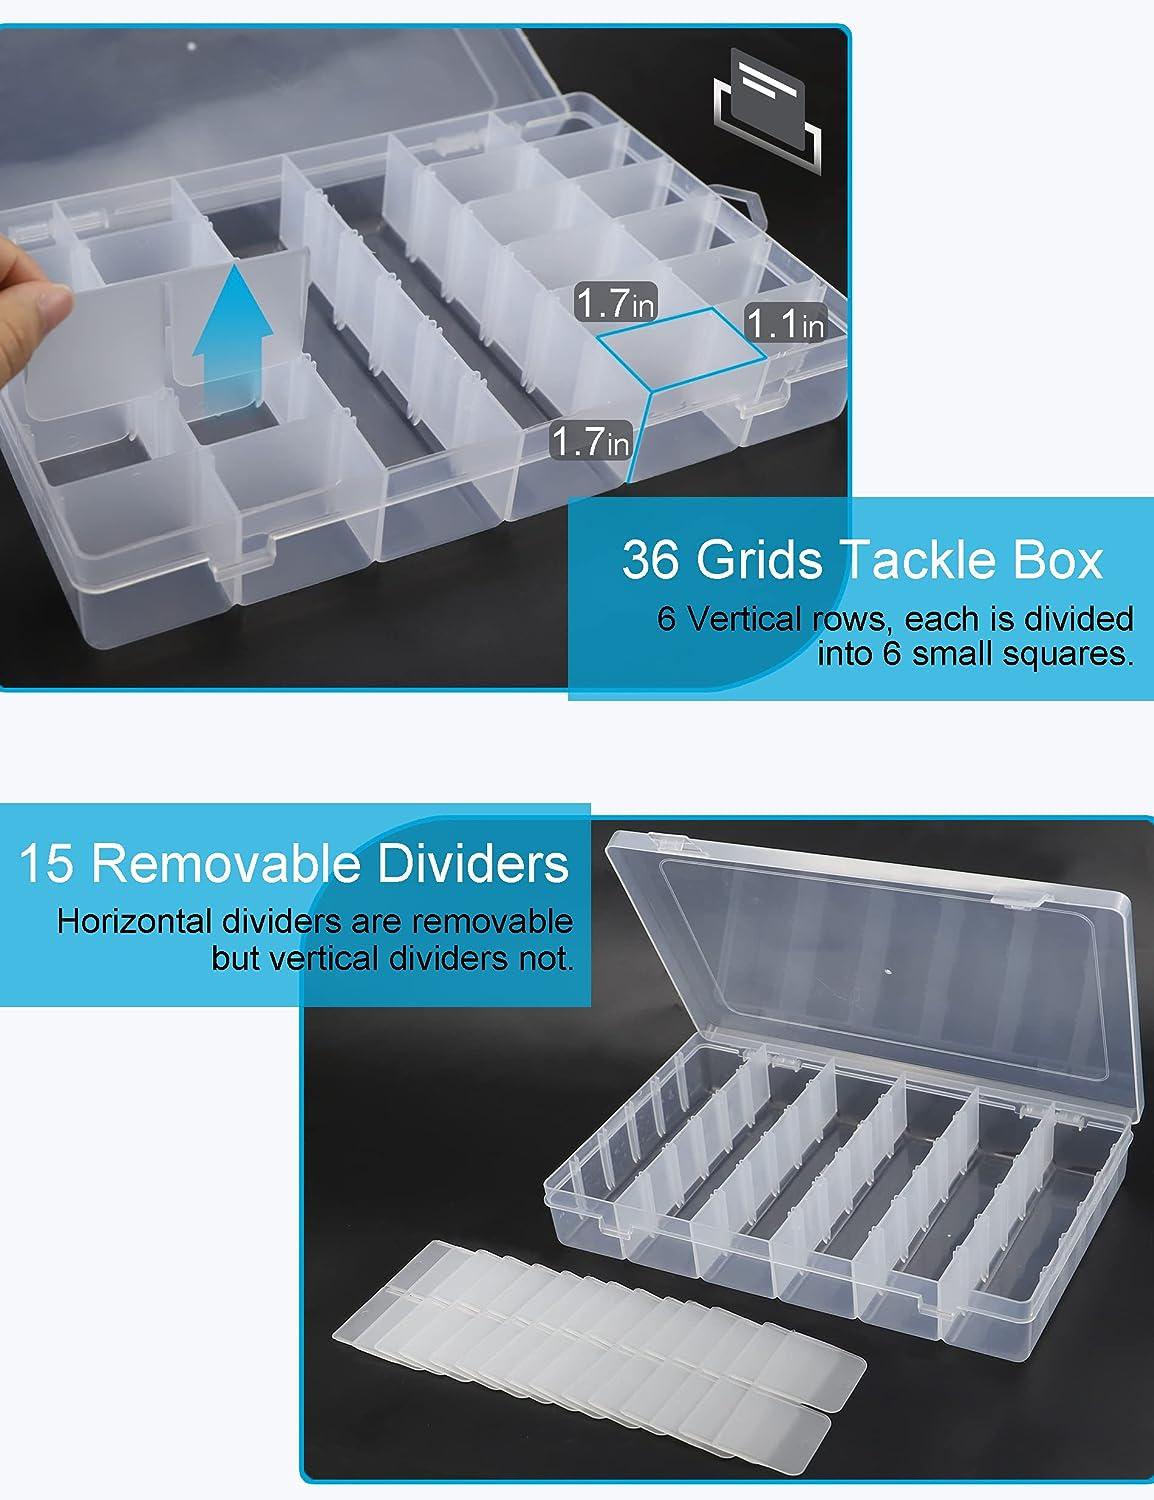 Tackle Box Snackle Box Container Bead Organizer Compartment